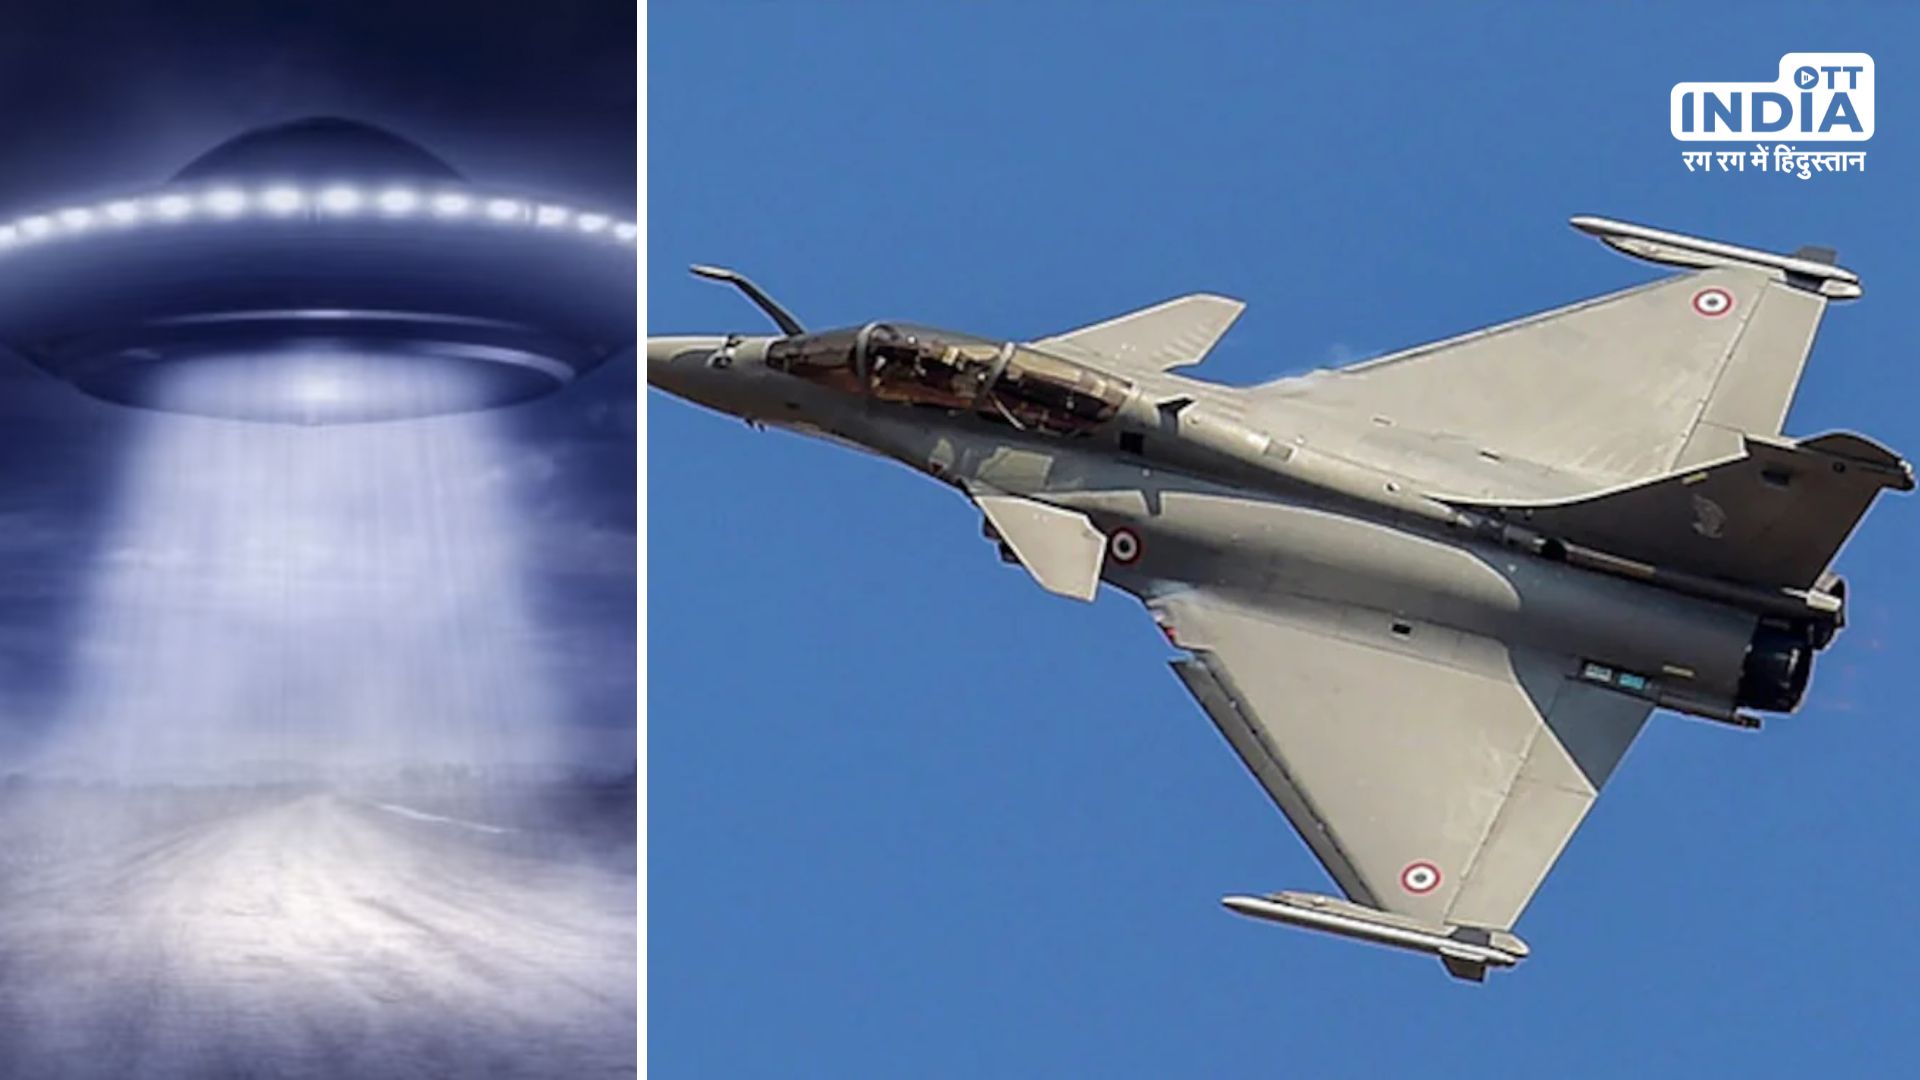 Indian Air Force fighter jet Rafale Chase after seeing UFO IN SKY